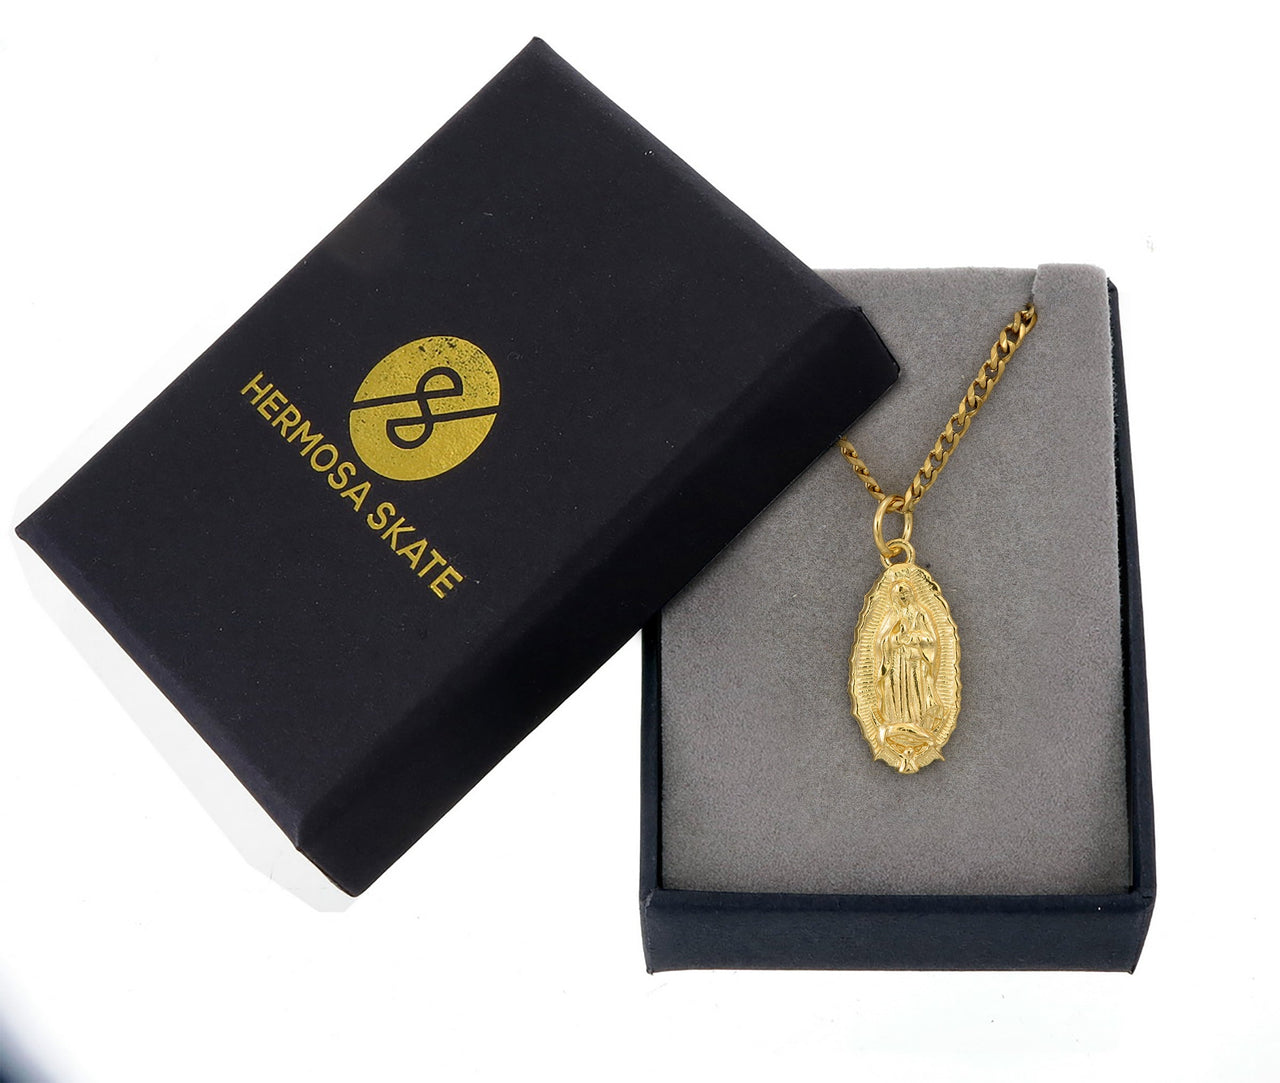 40% off ADD ON - LADY GUADALUPE PENDANT (GOLD)